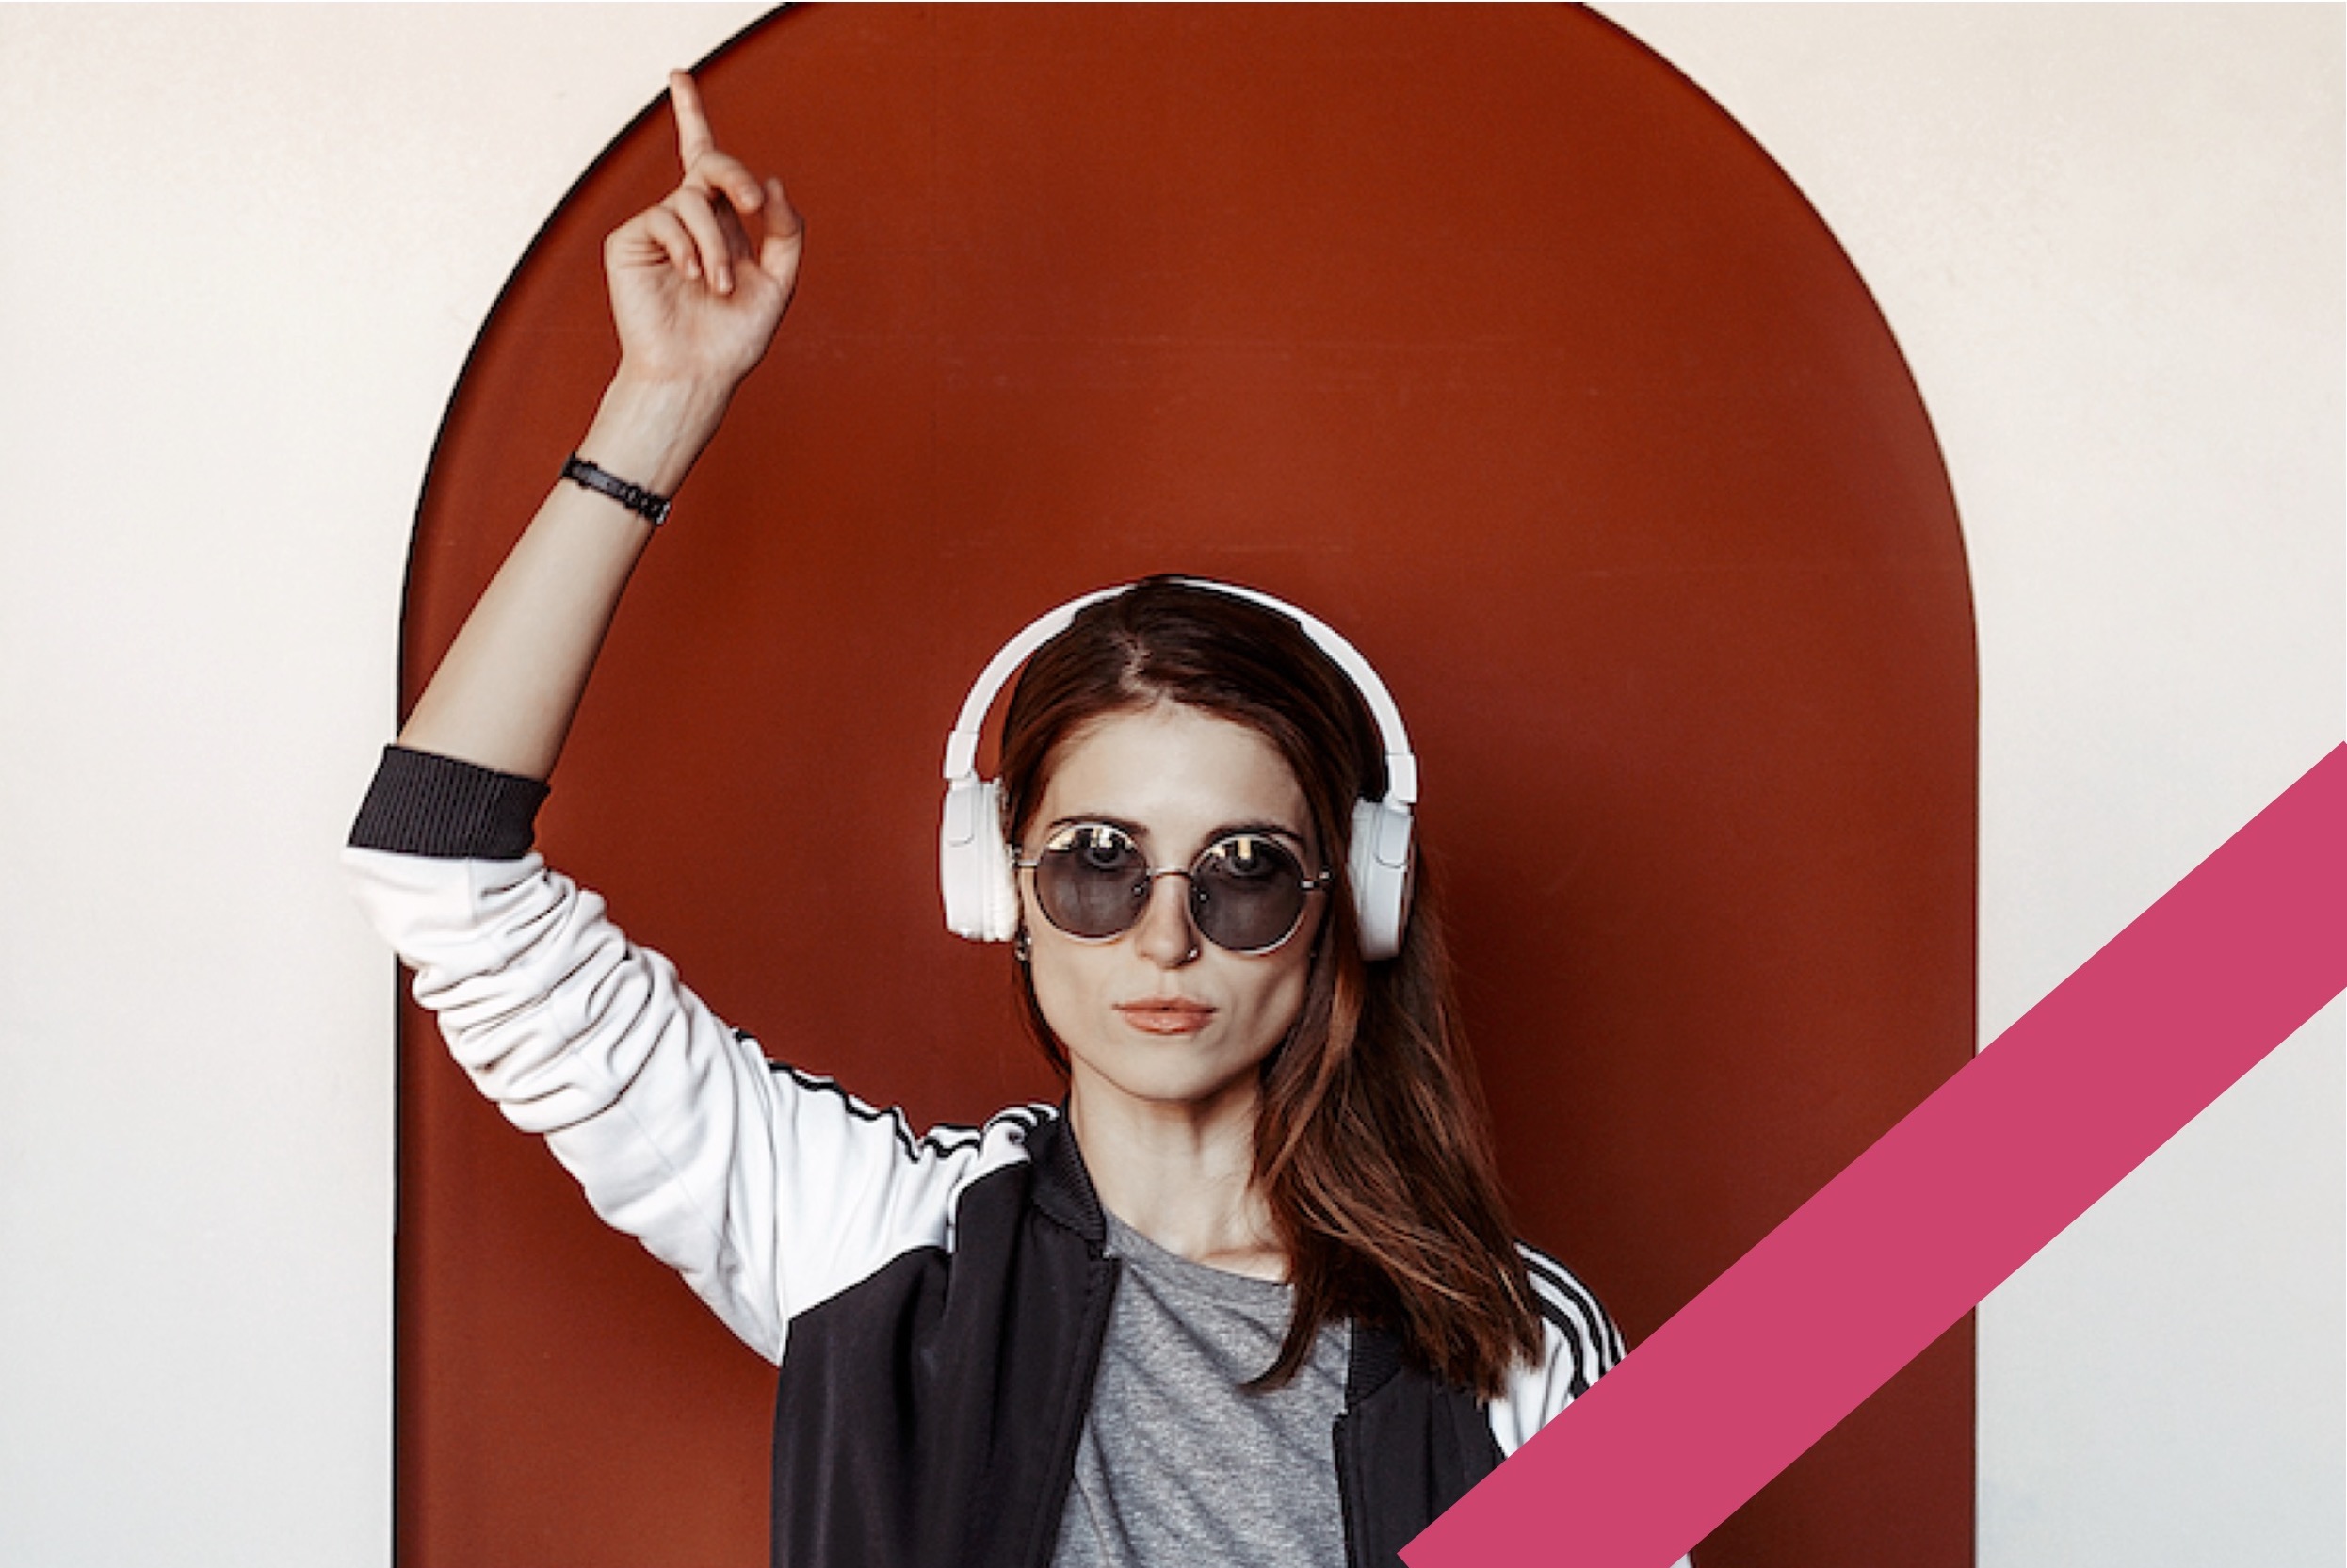 beautiful woman wearing cool sunglasses pointing upward with earphones on